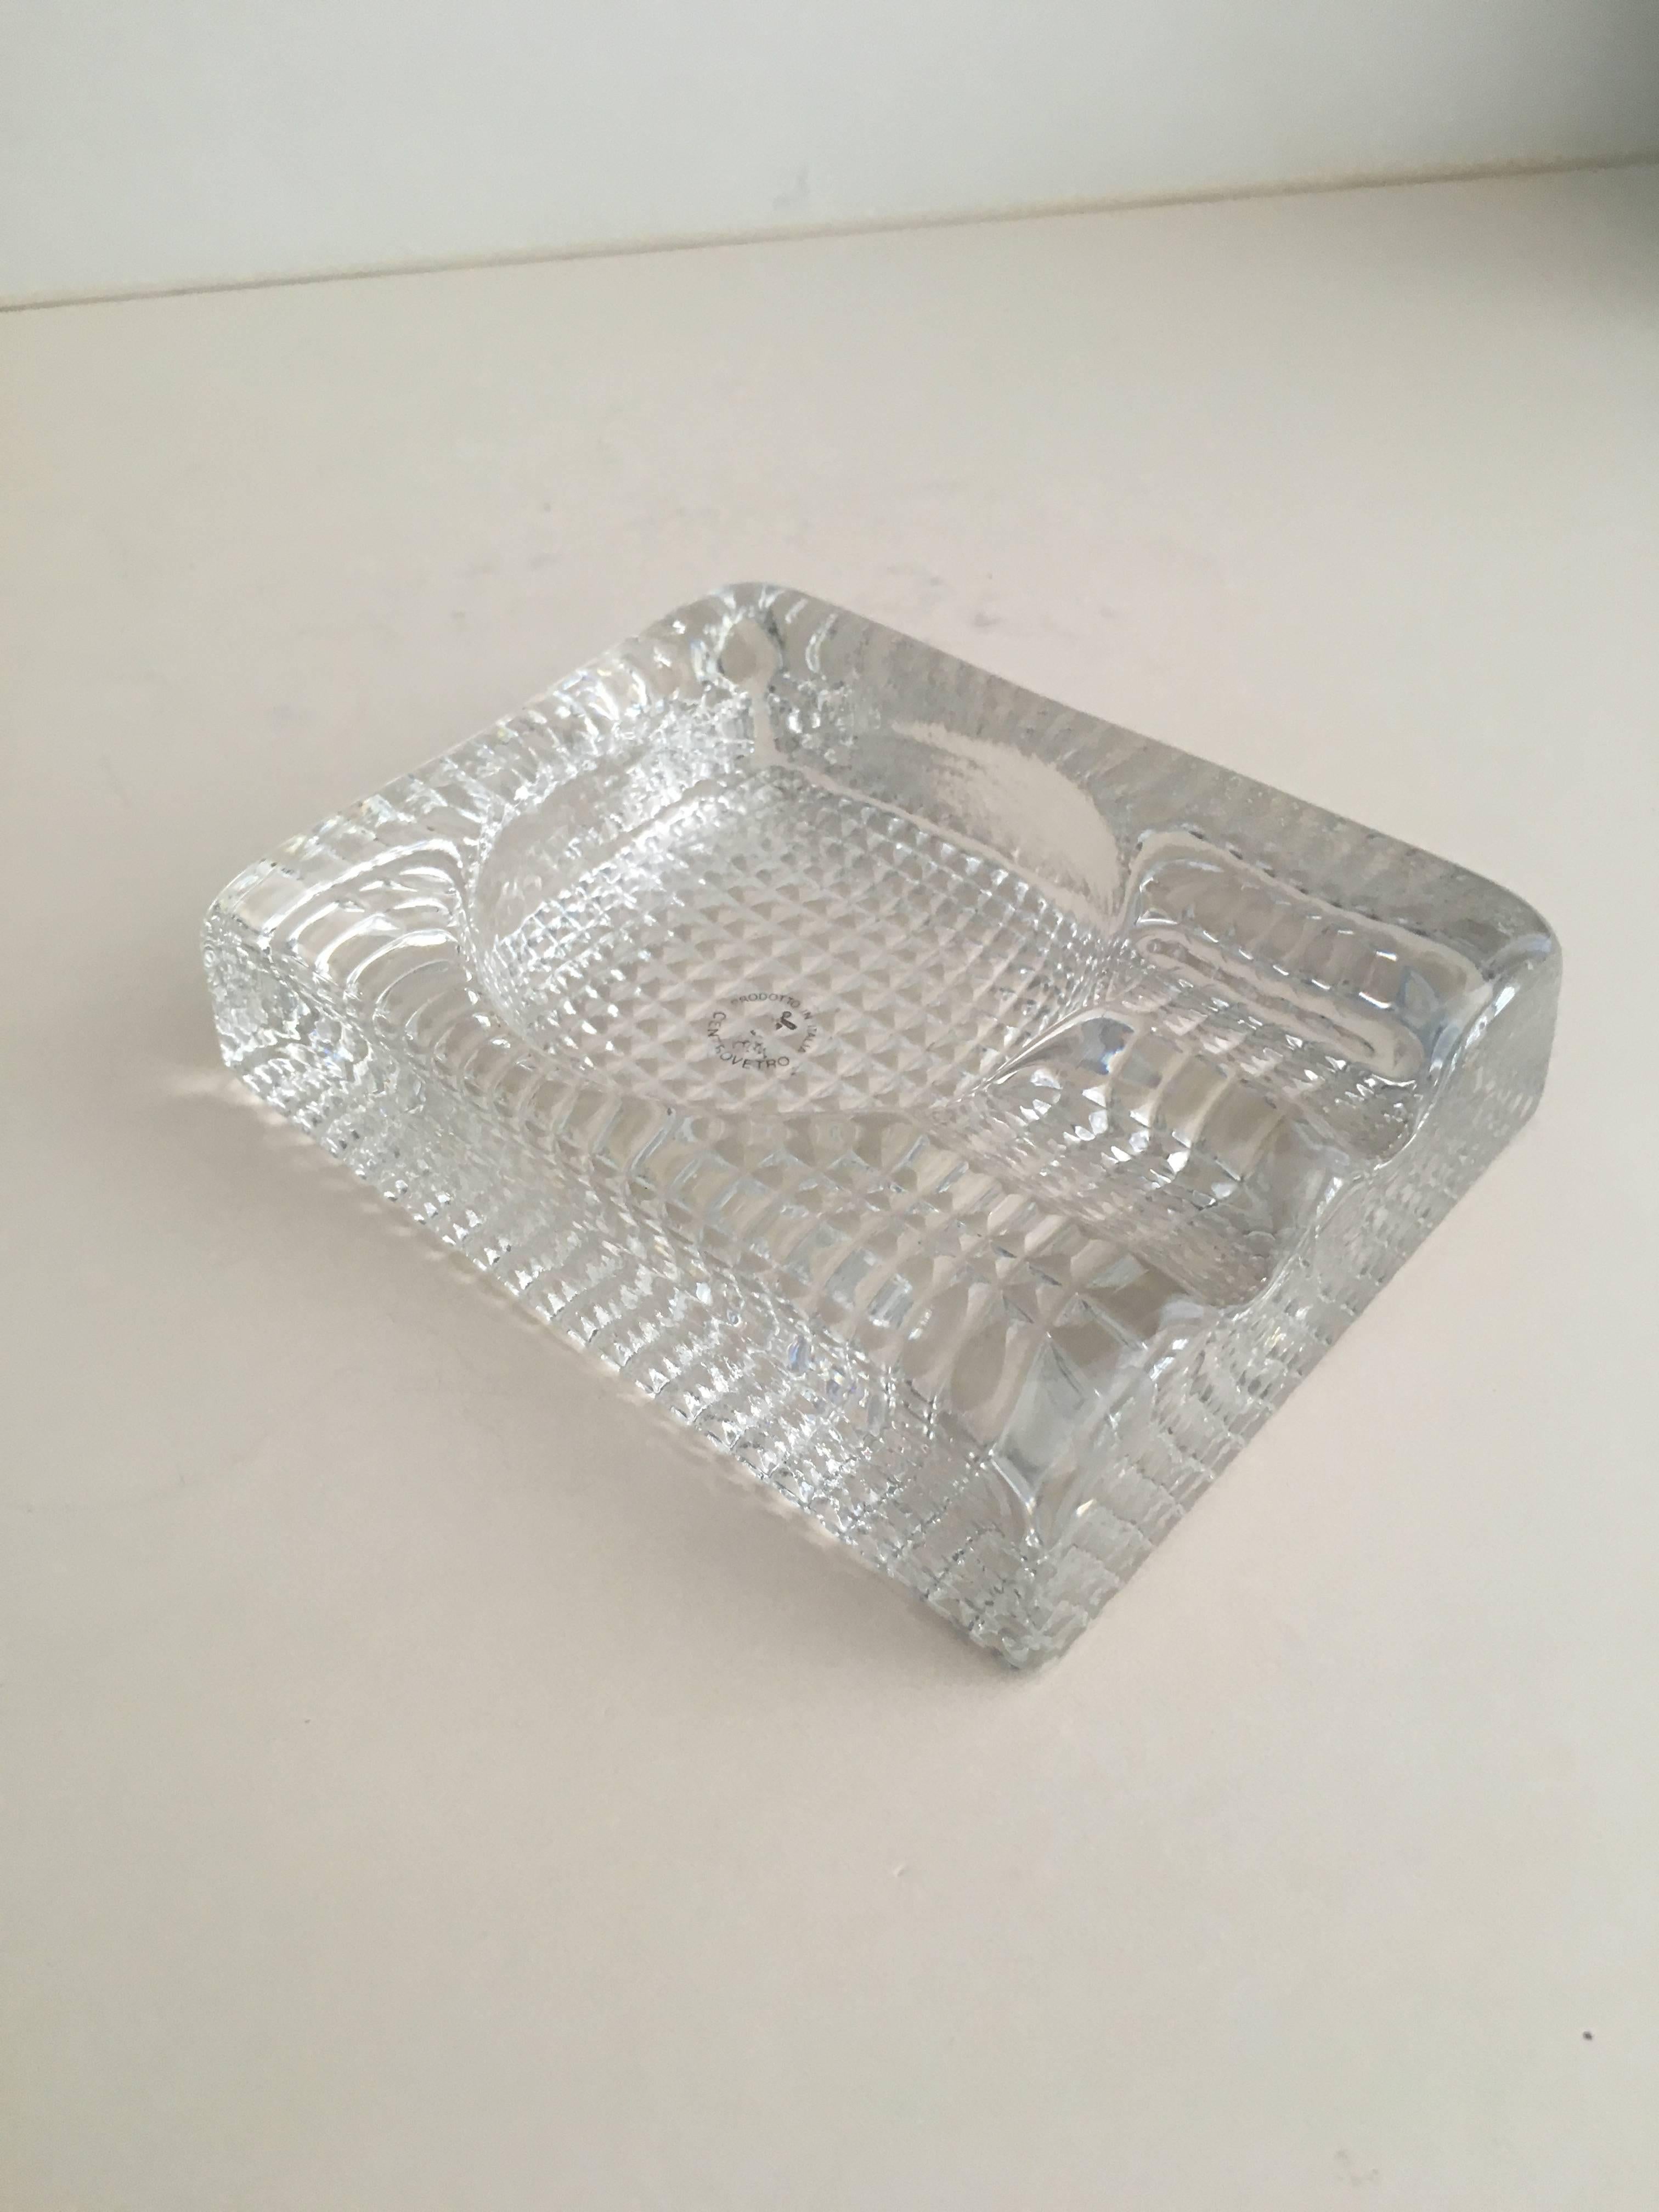 Italian quilted glass cigar ashtray, stylish and sexy. If you’re gonna be 